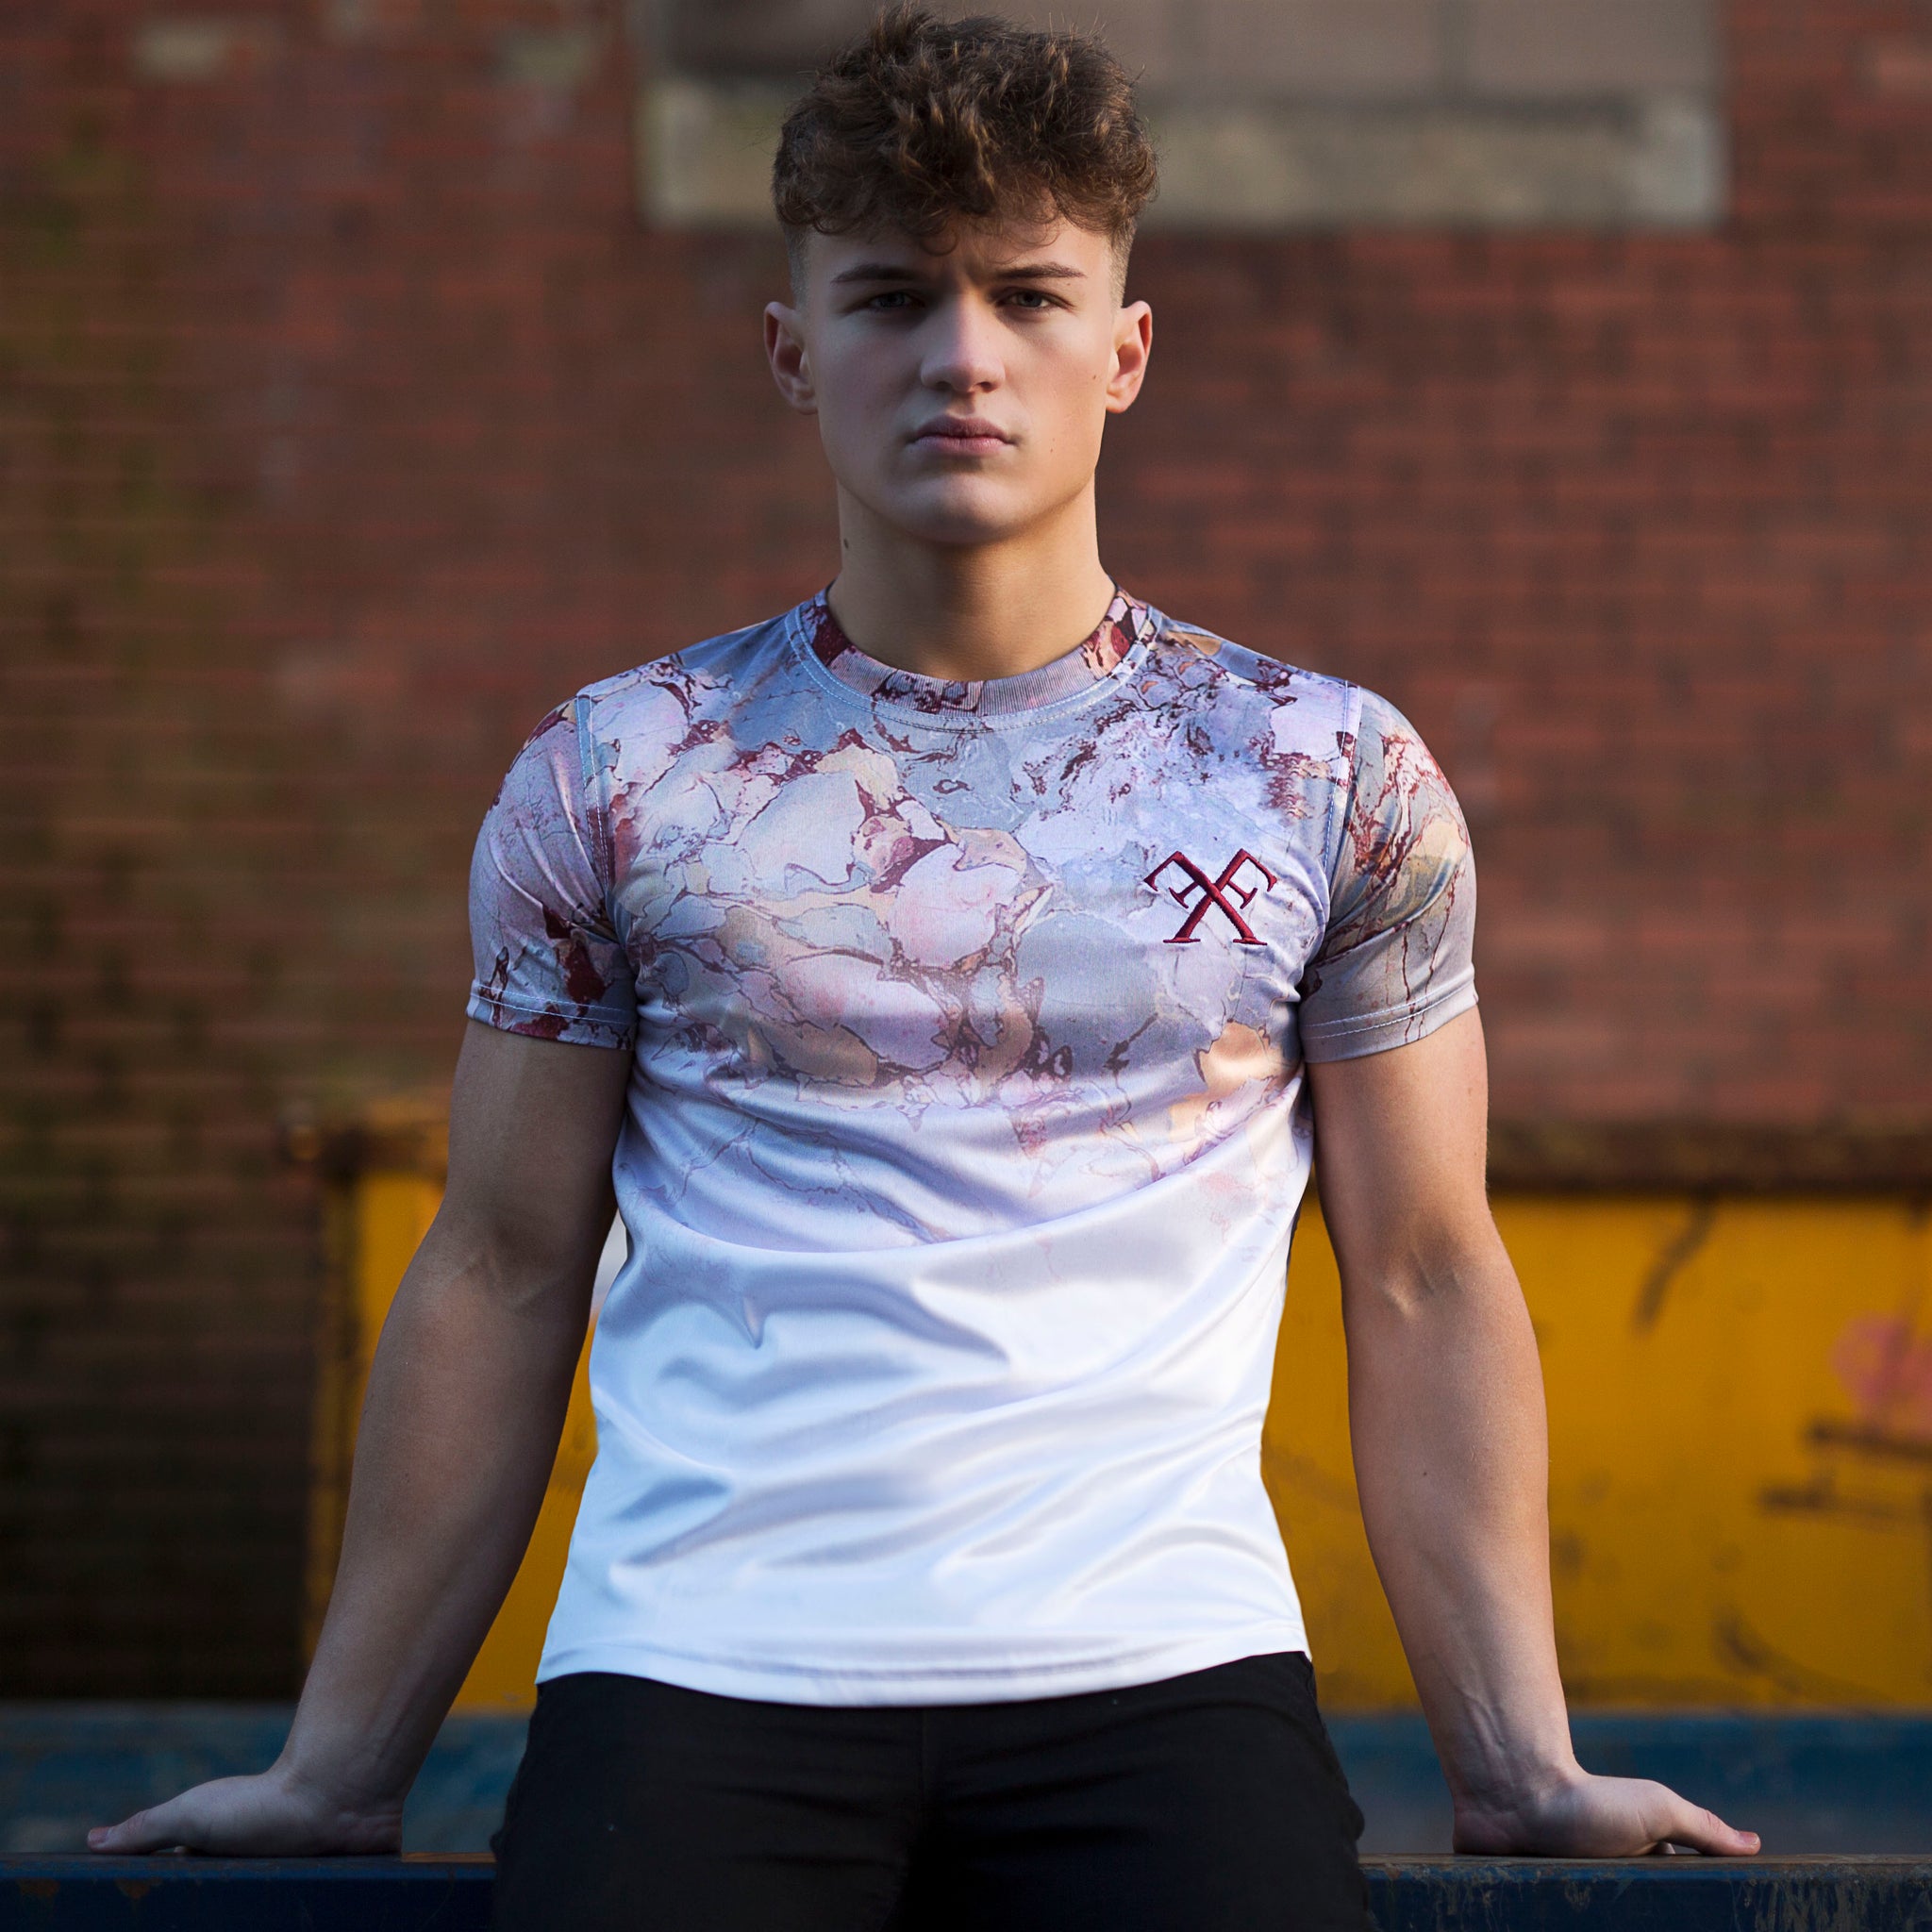 The Marble Fade Tee